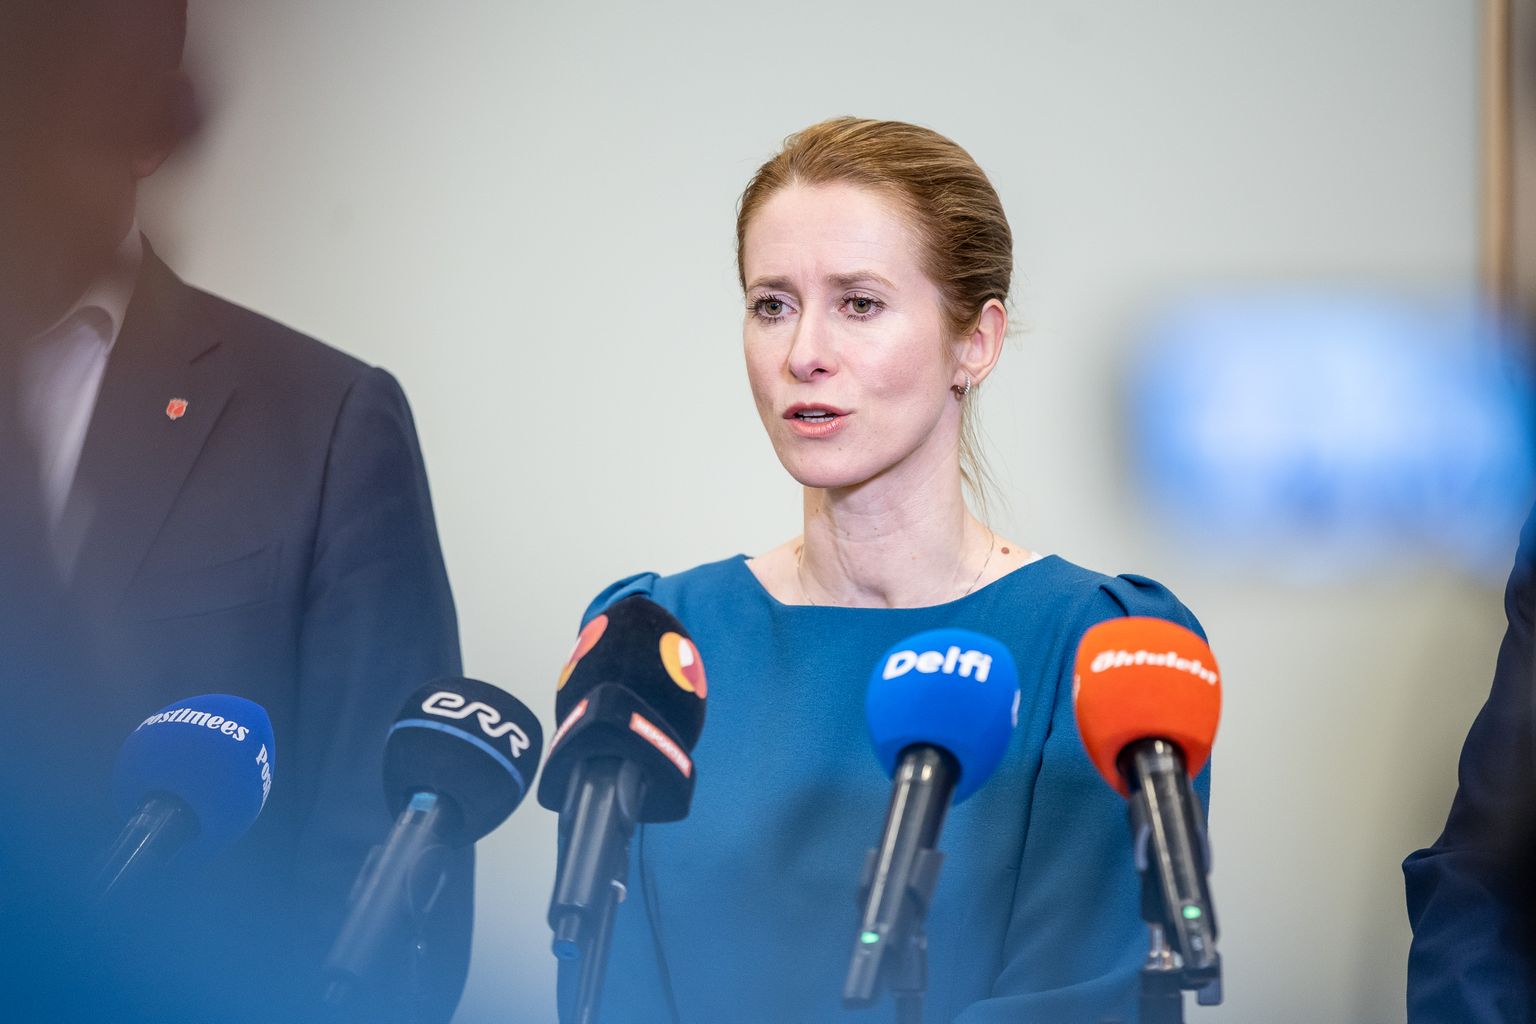 Leader of the Reform Party Kaja Kallas said that the prospective government coalition plans to make the acquisition of education mandatory until the age of 18.